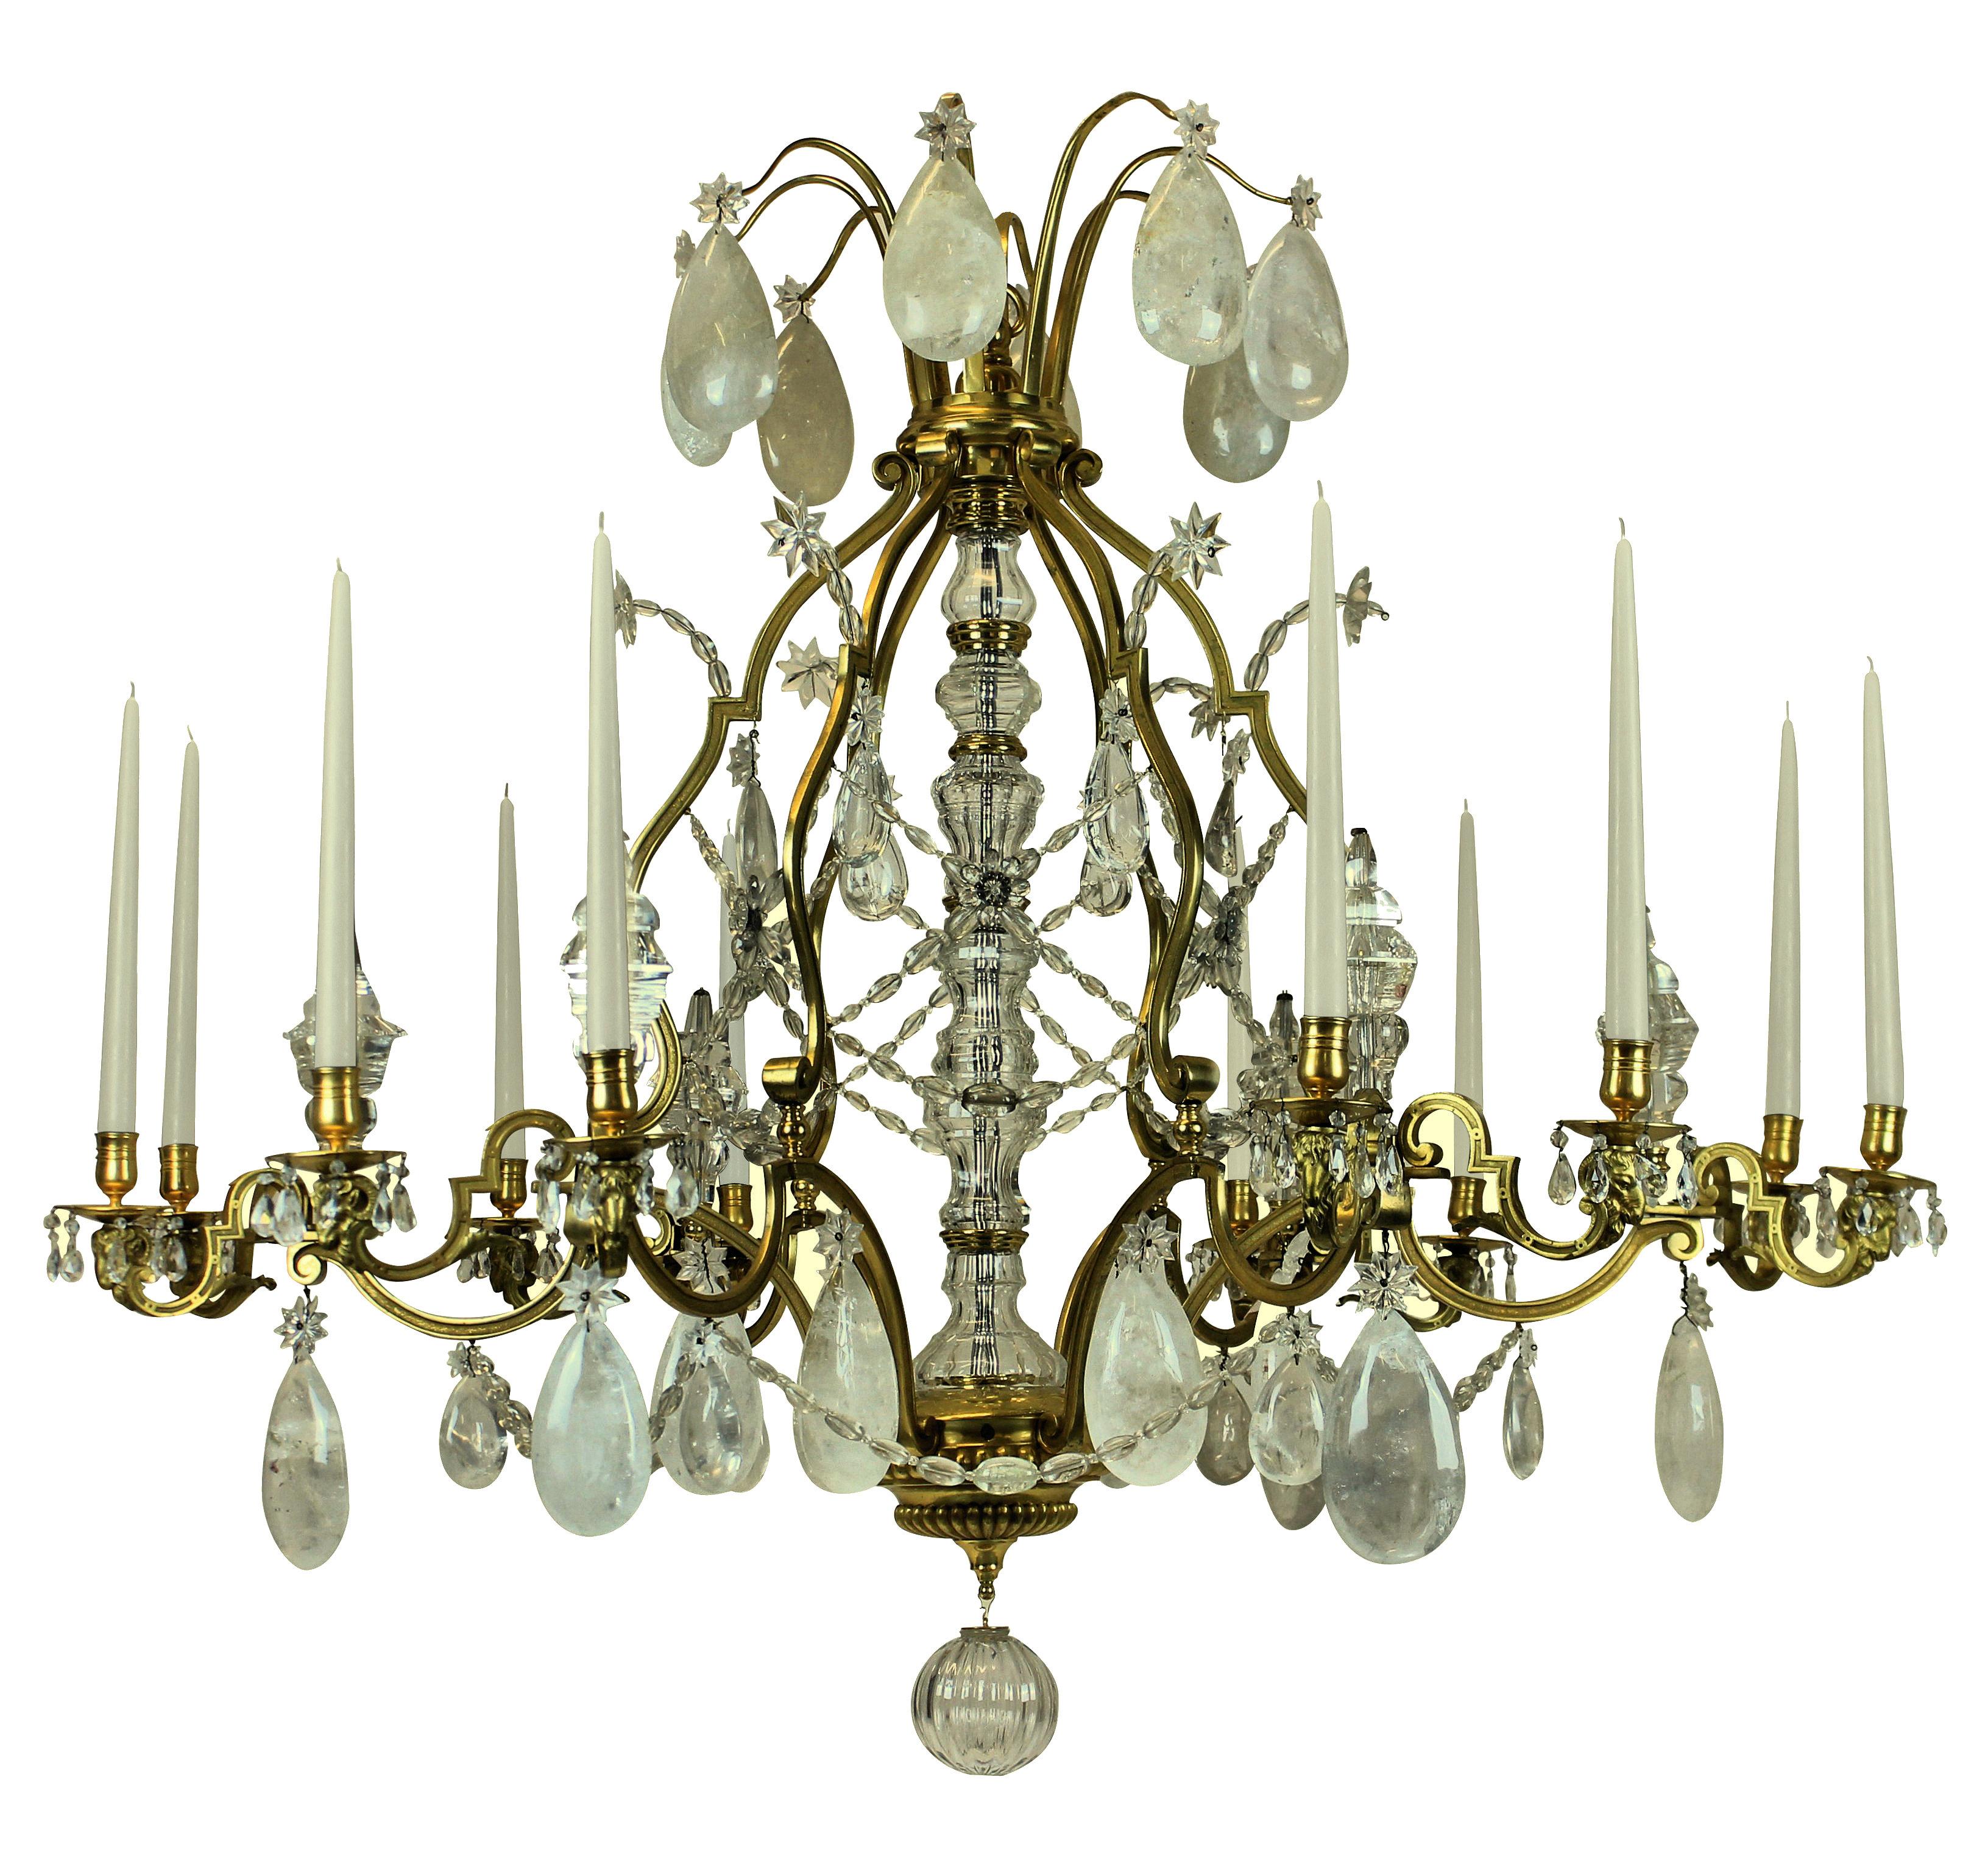 A large Louis XV style chandelier of the highest quality, with mercury gilded and burnished bronze and hung with rock crystal. With ram's head decoration to each arm, of which there are twelve in total, with beads, spires and pendant drops. Can be